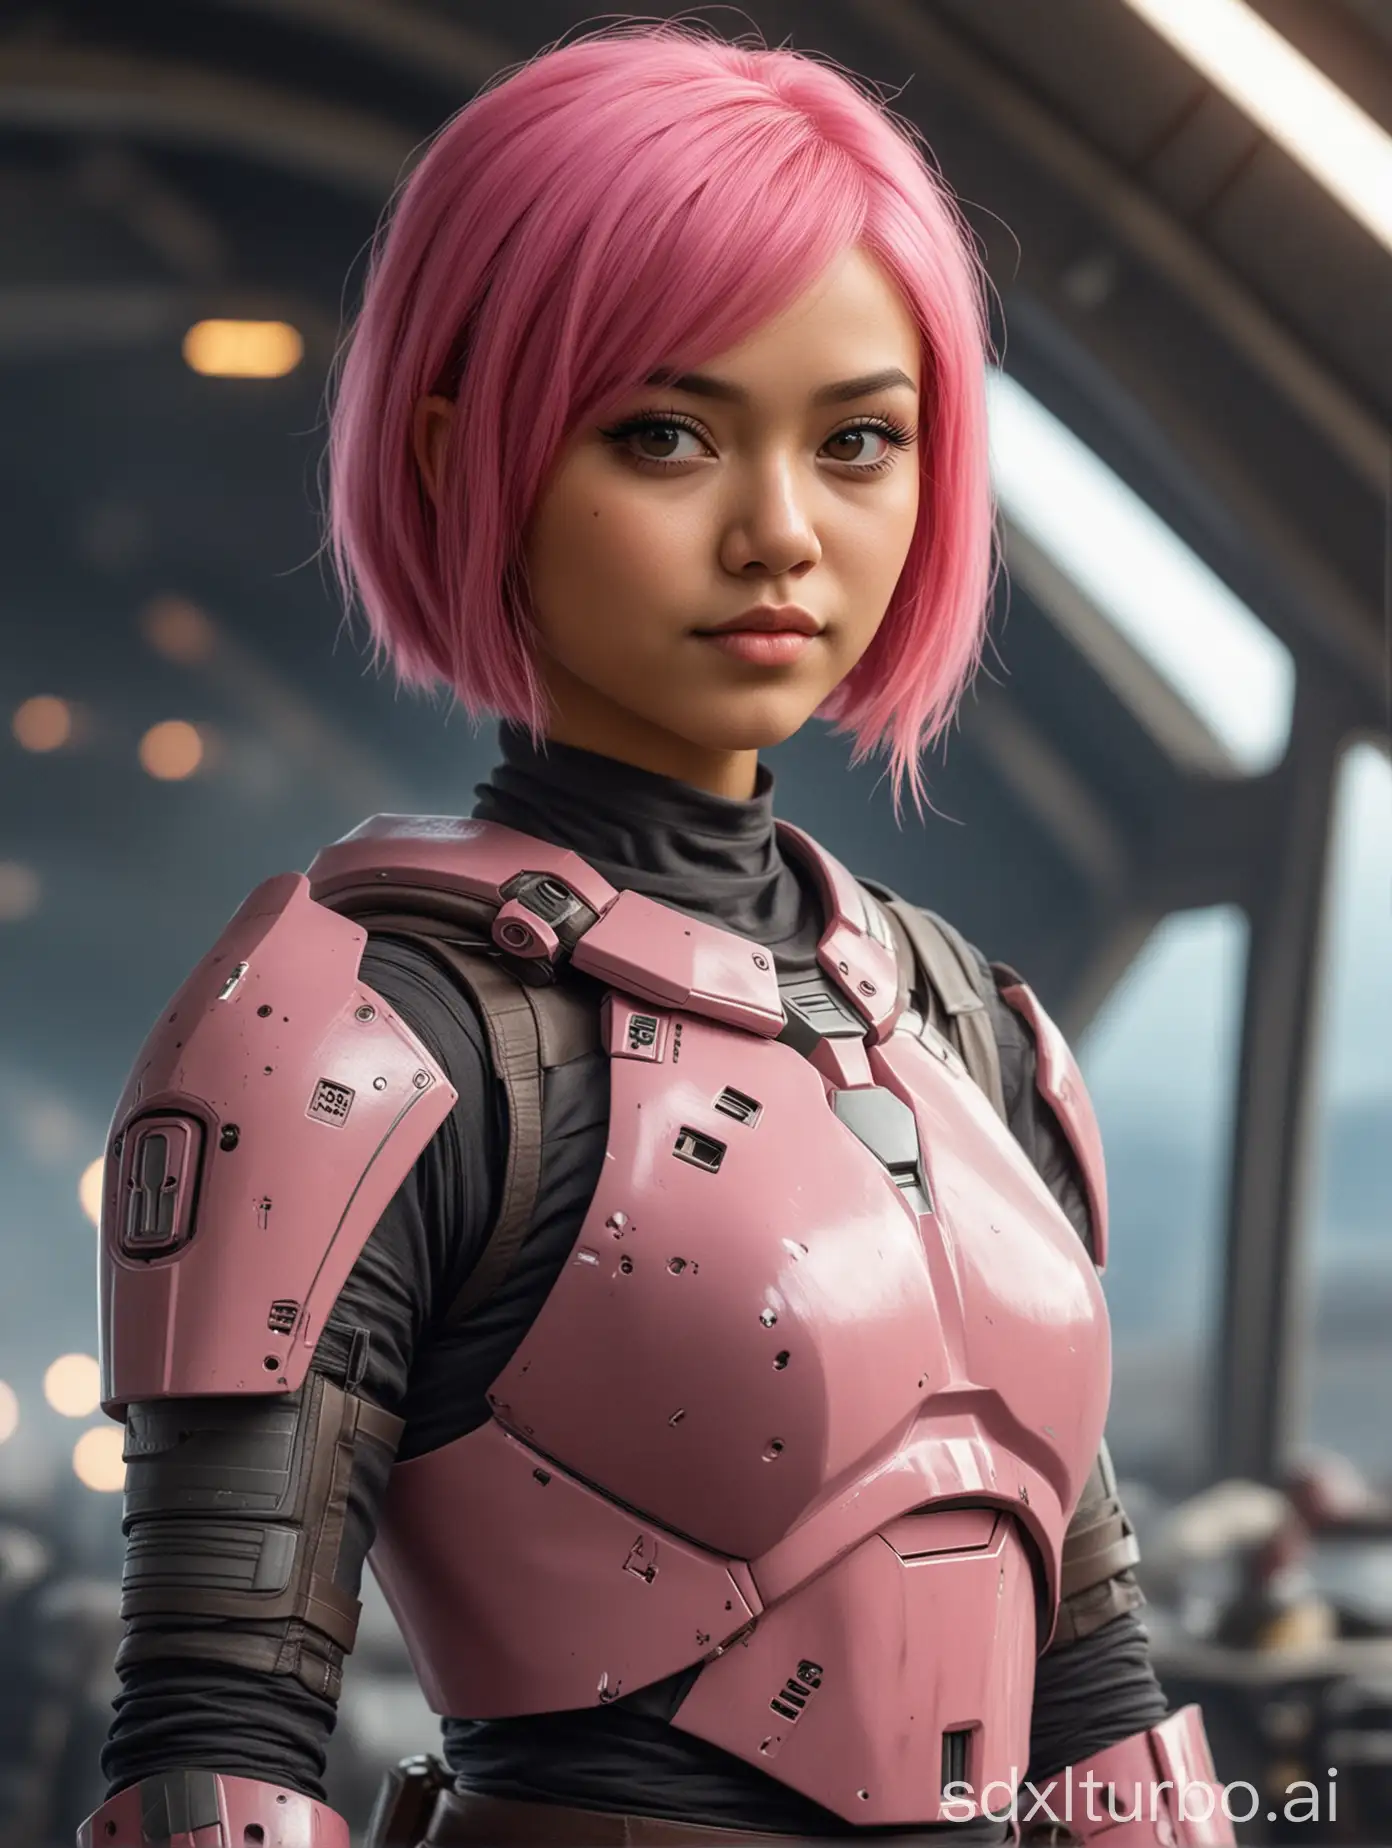 16YearOld-Southeast-Asian-Mandalorian-Girl-with-Pink-Hair-at-a-Spaceport